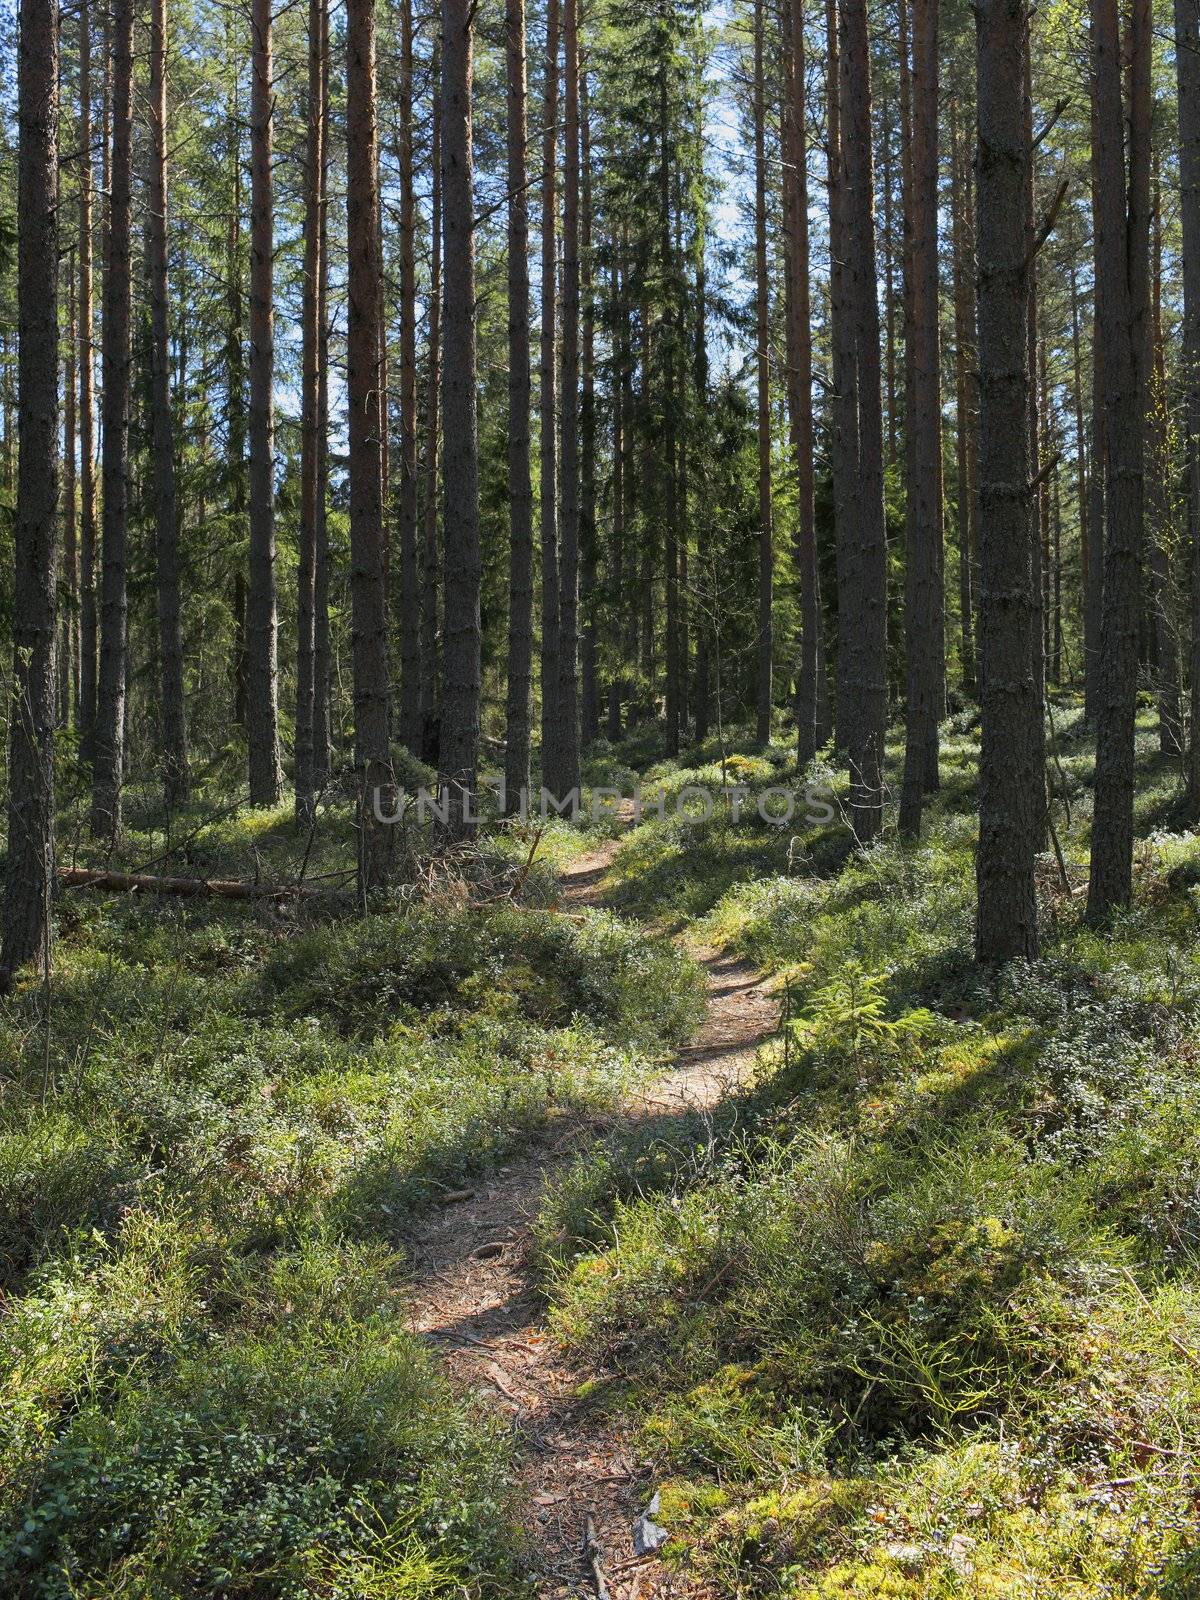 A path in a Finnish forest in may.